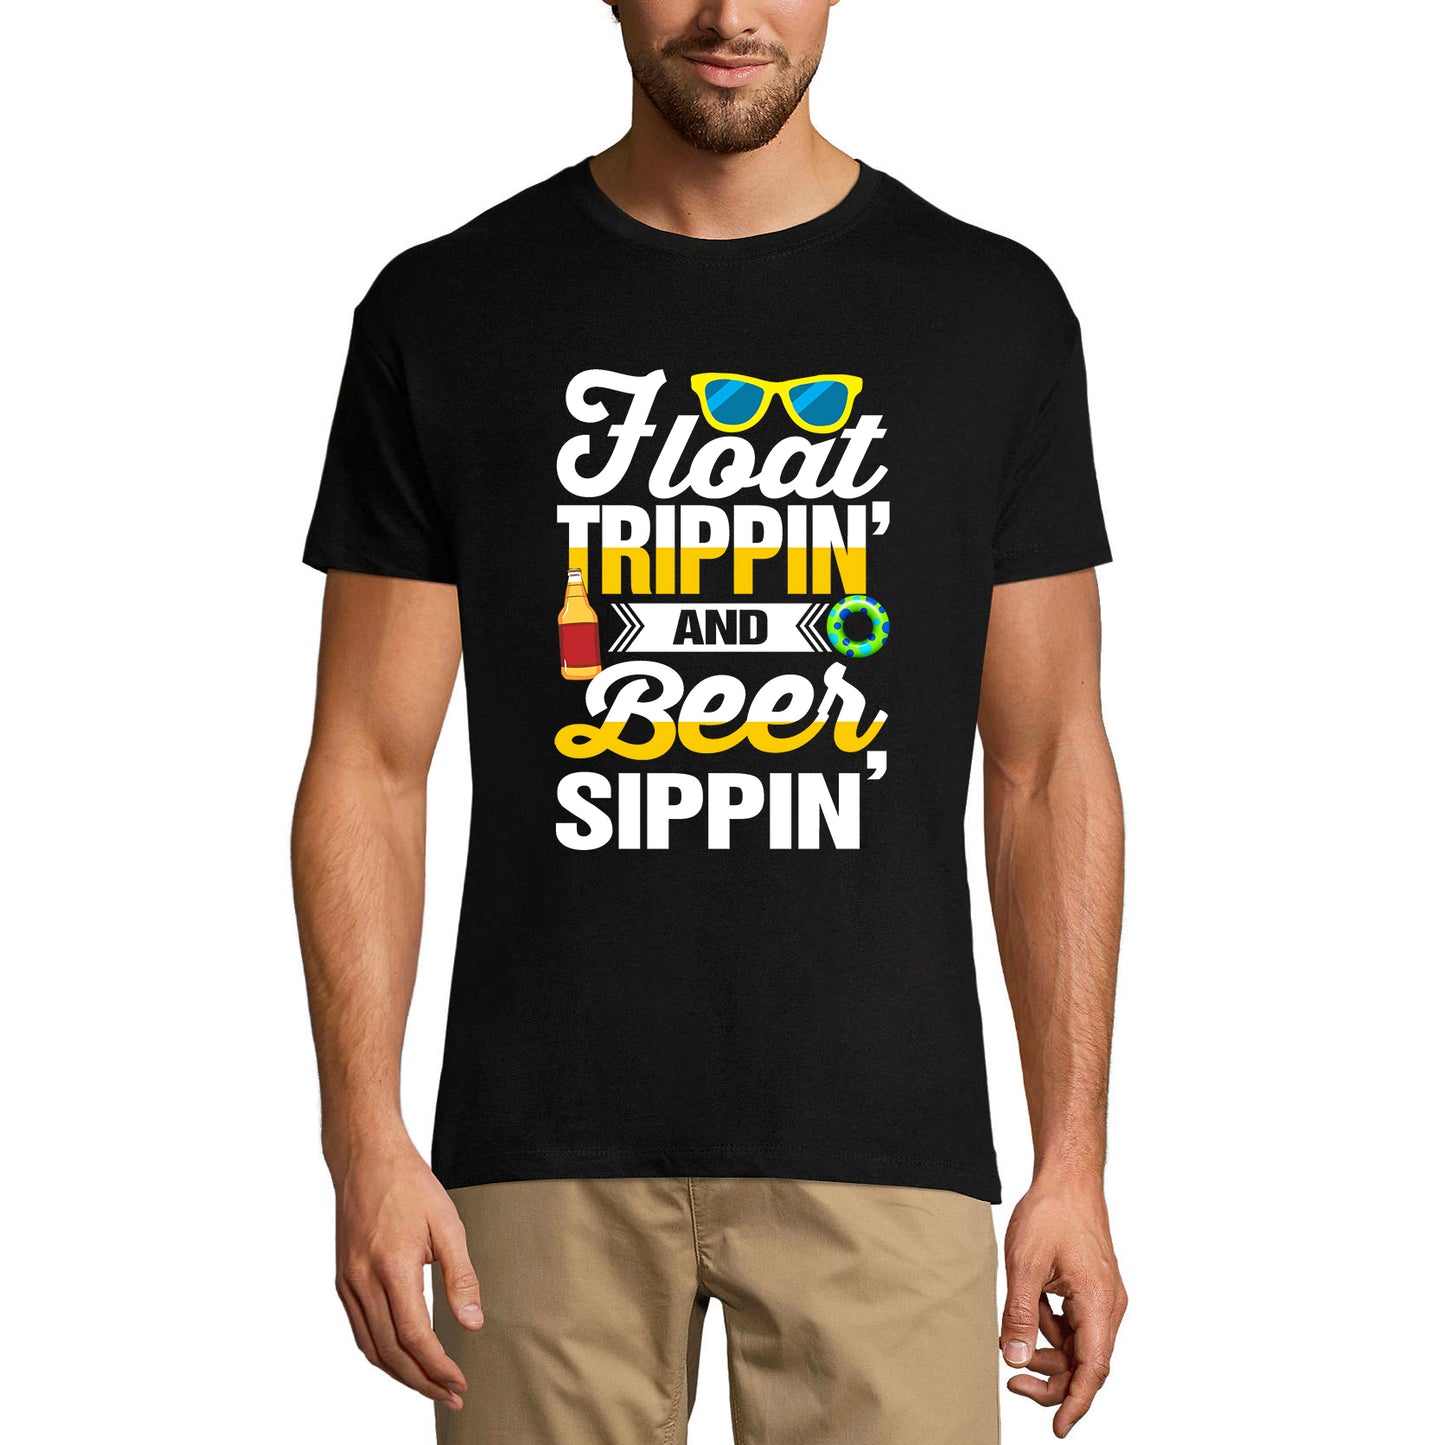 ULTRABASIC Men's Funny T-Shirt Float Trippin' and Beer Sippin' - Beer Lover Tee Shirt